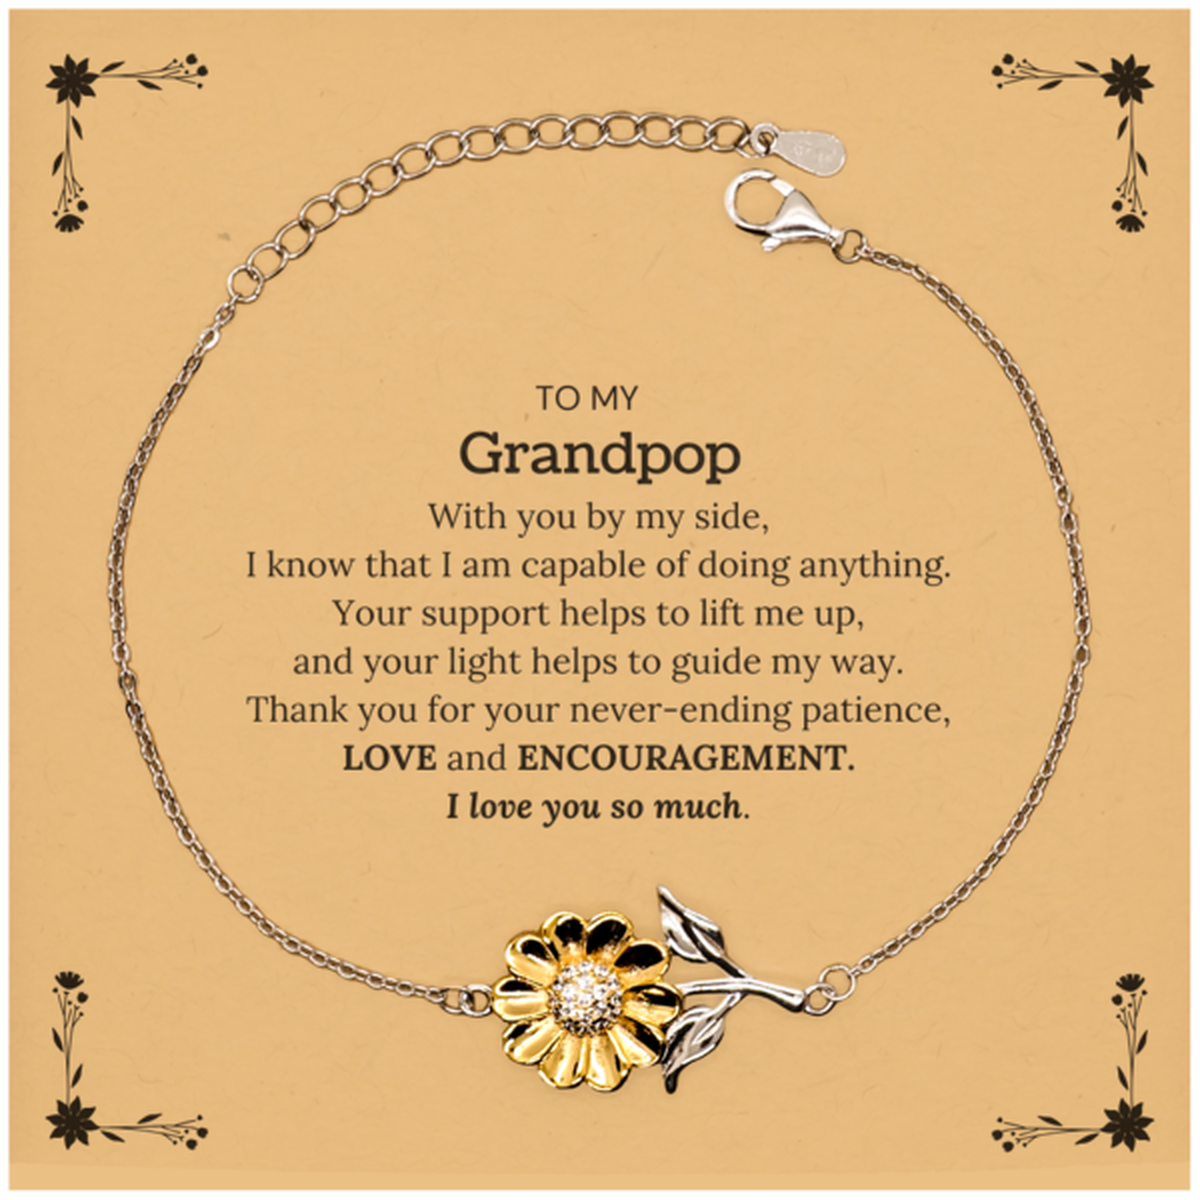 Appreciation Grandpop Sunflower Bracelet Gifts, To My Grandpop Birthday Christmas Wedding Keepsake Gifts for Grandpop With you by my side, I know that I am capable of doing anything. I love you so much